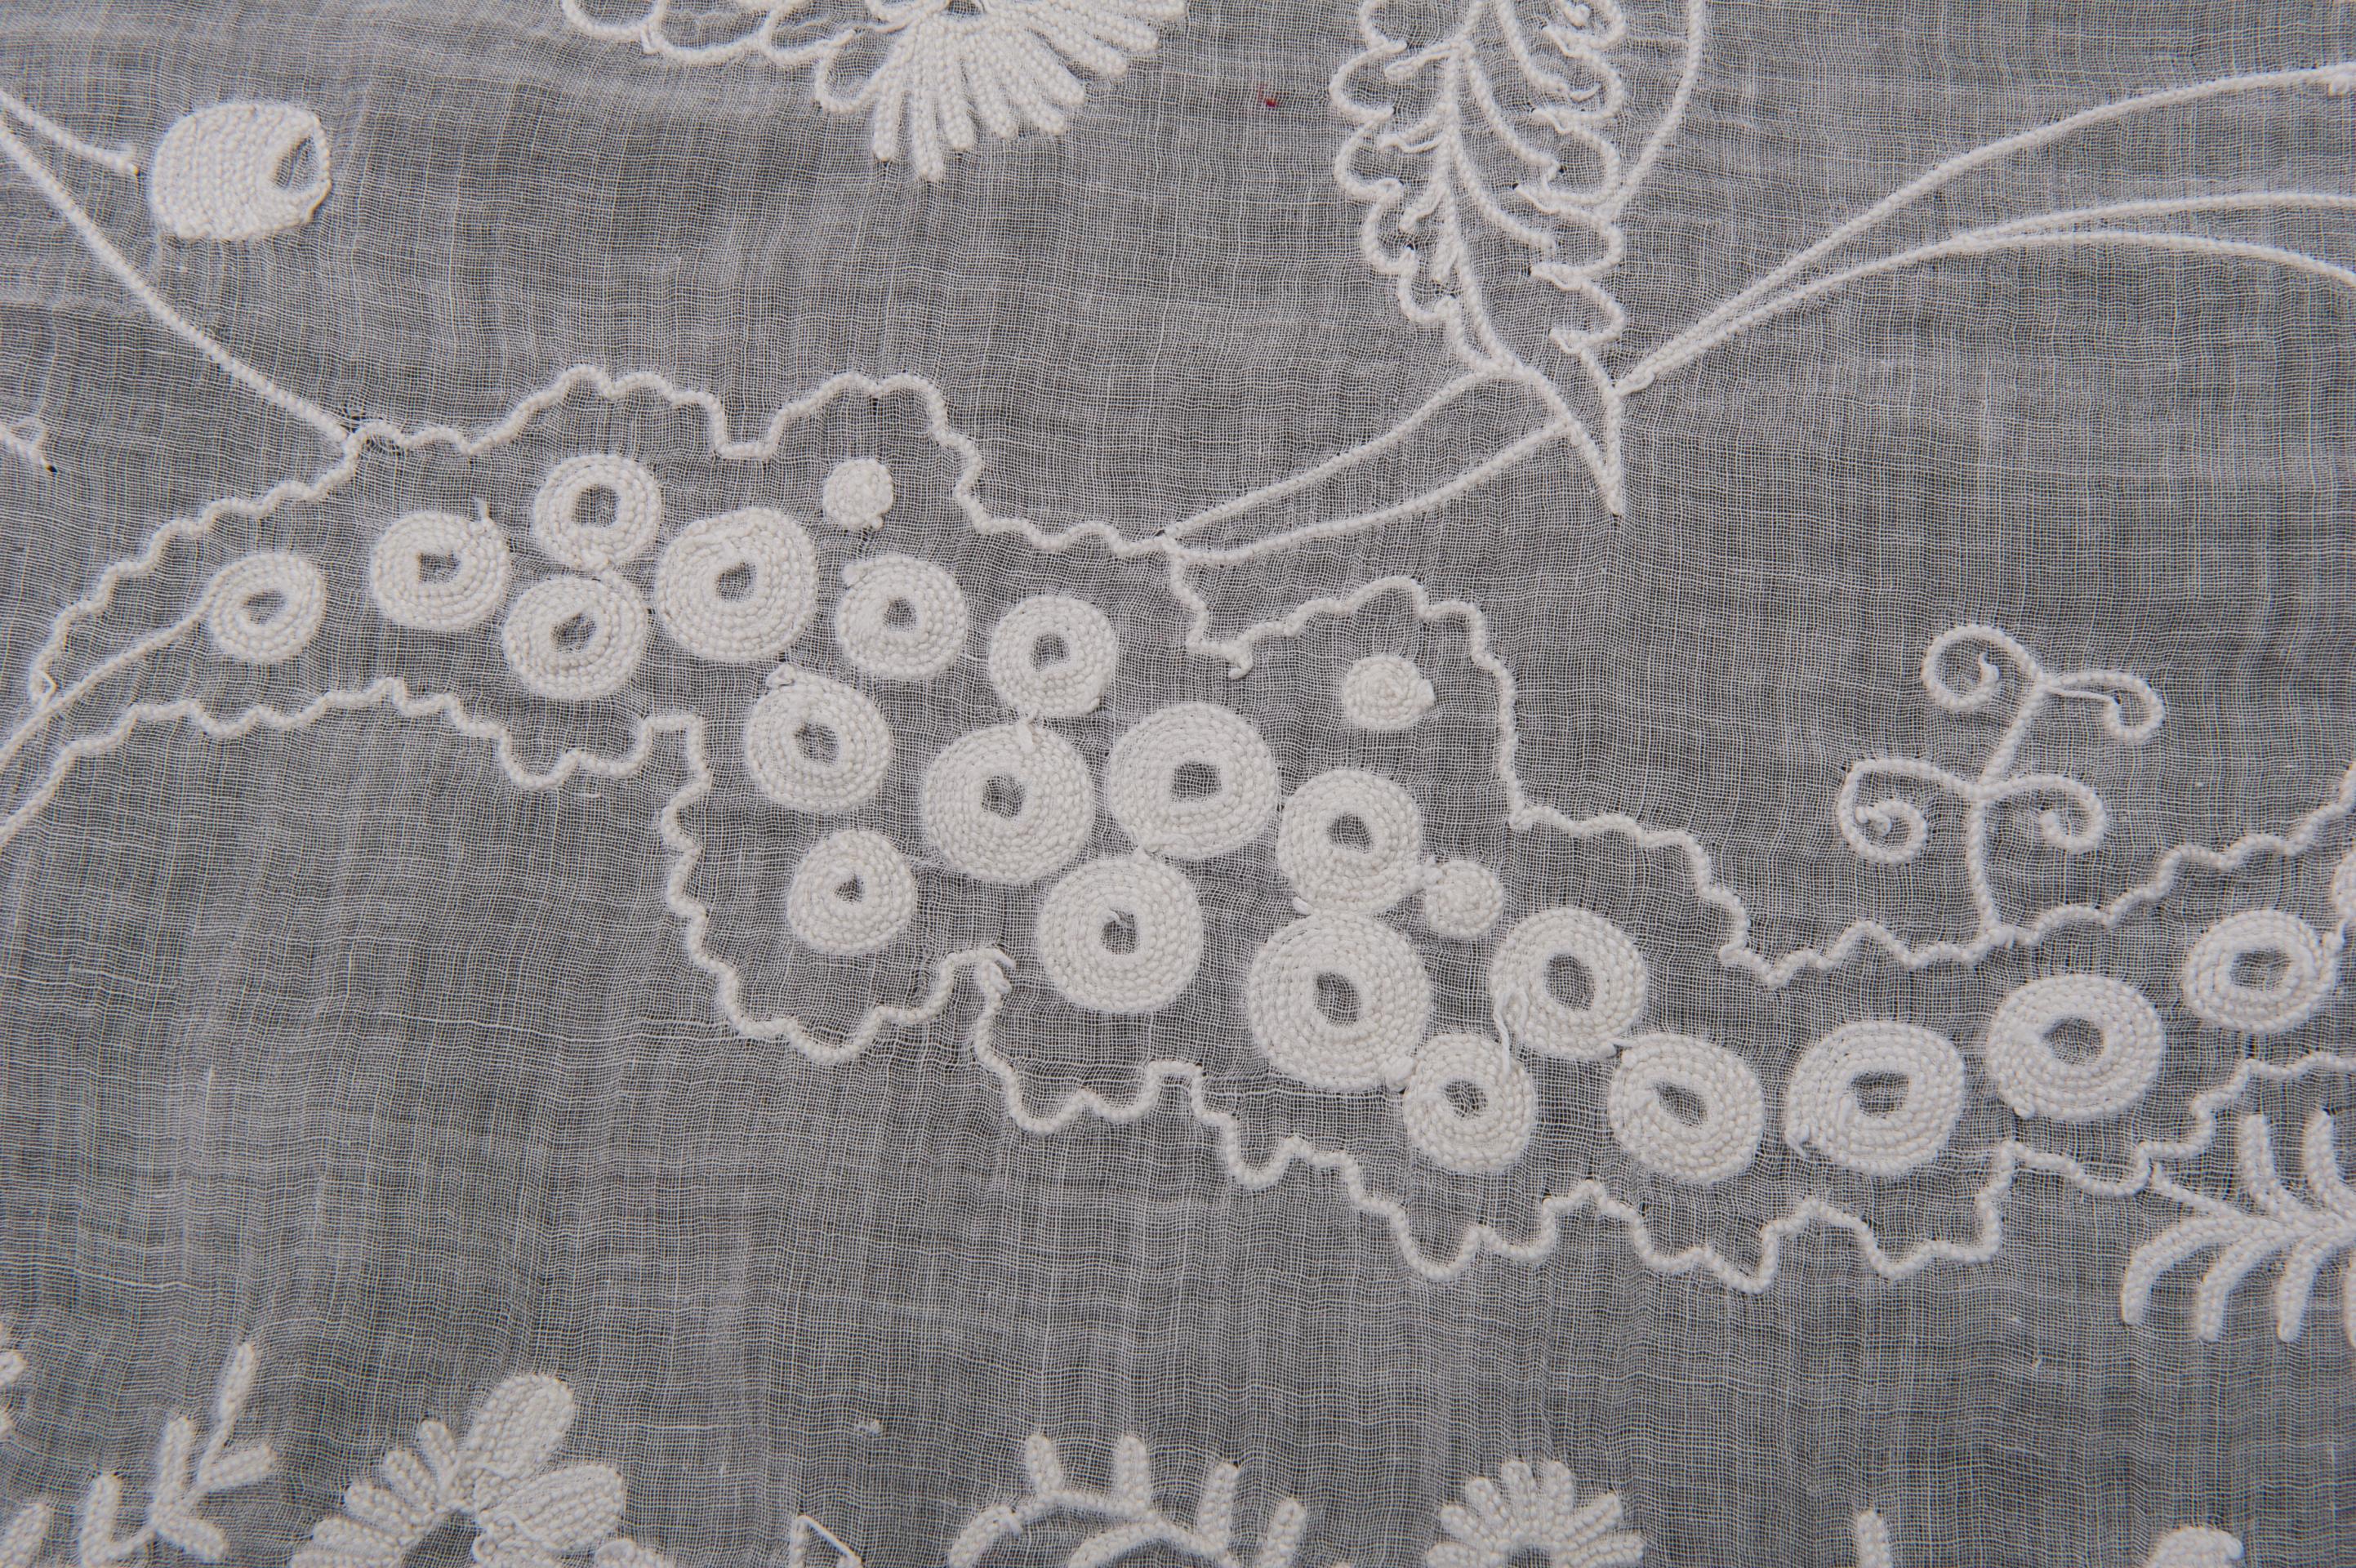 Embroidered Rare Bed Cover or Tablecloth in Corneline Tissue